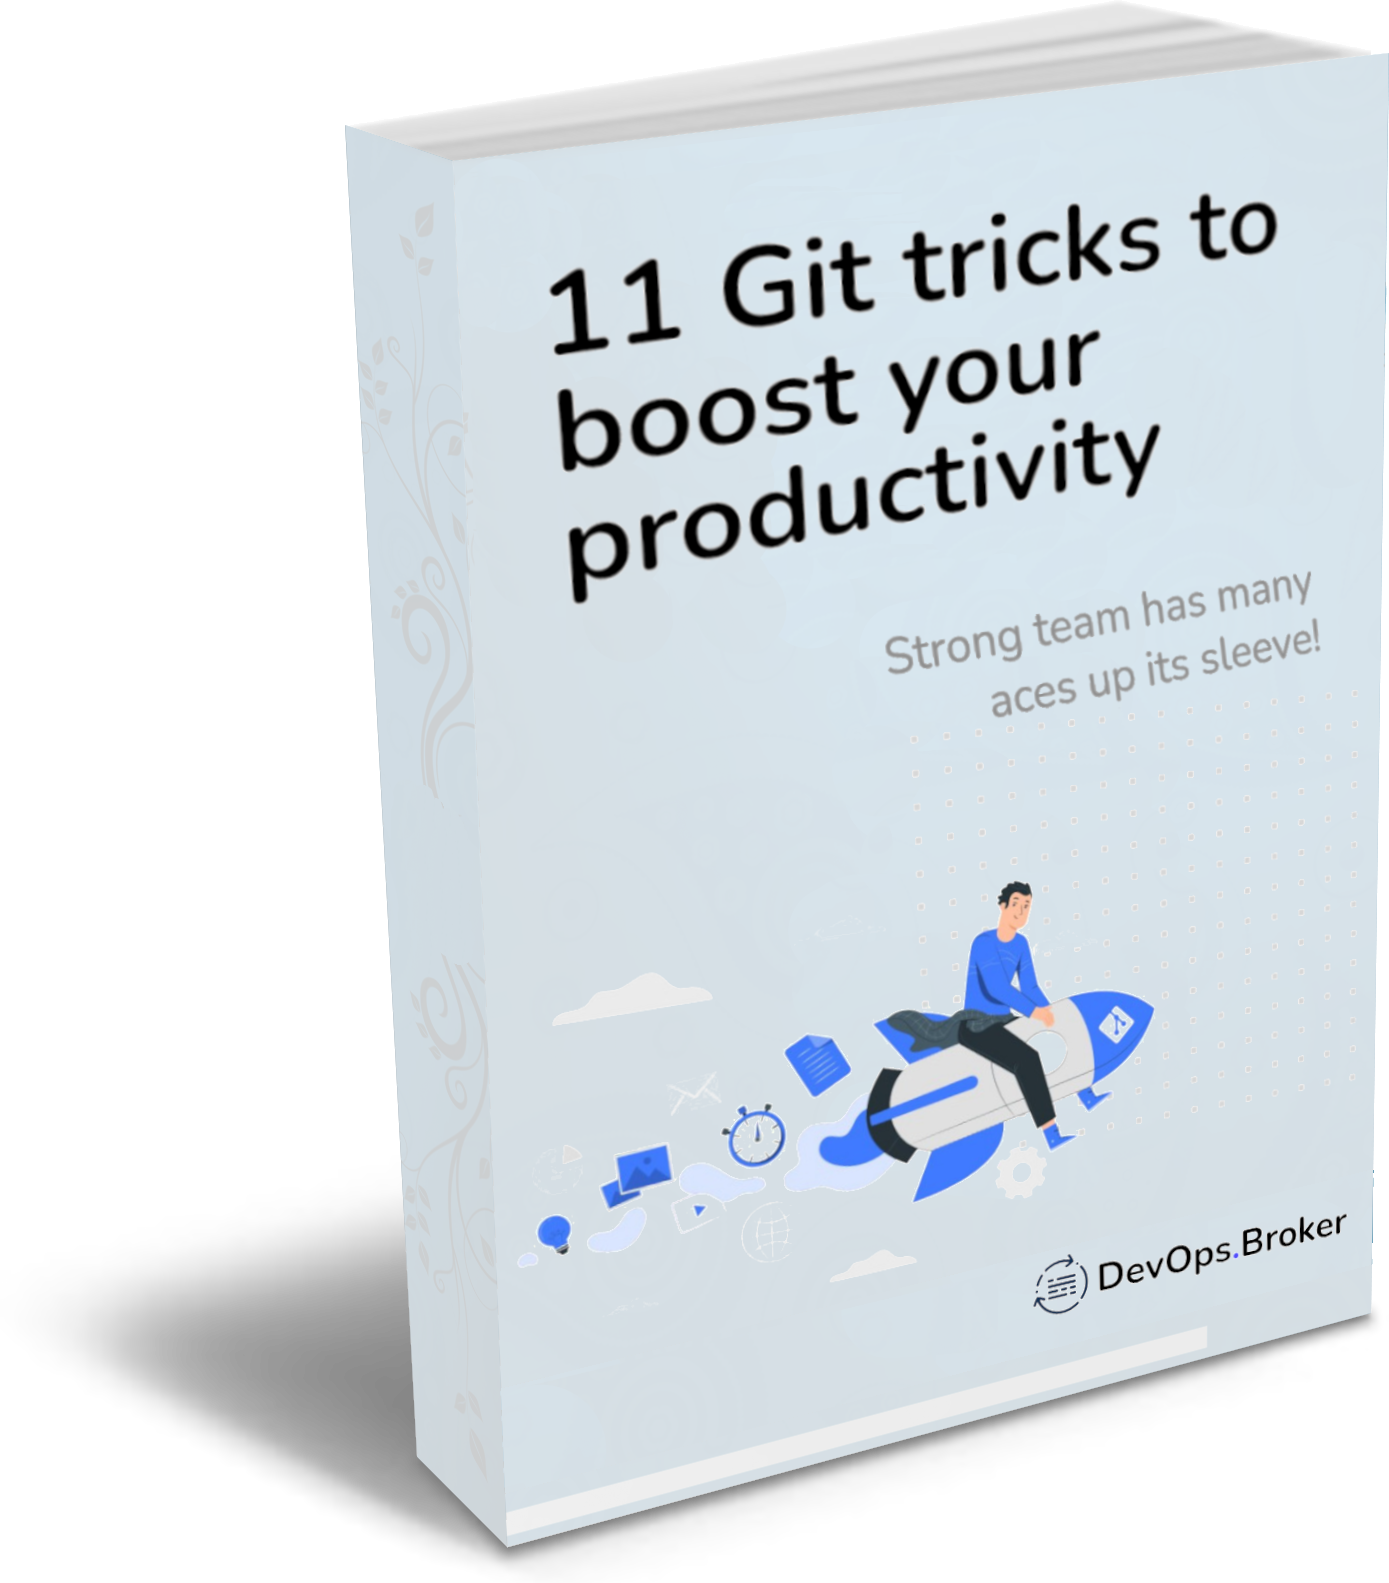 11 Git tricks to boost your productivity